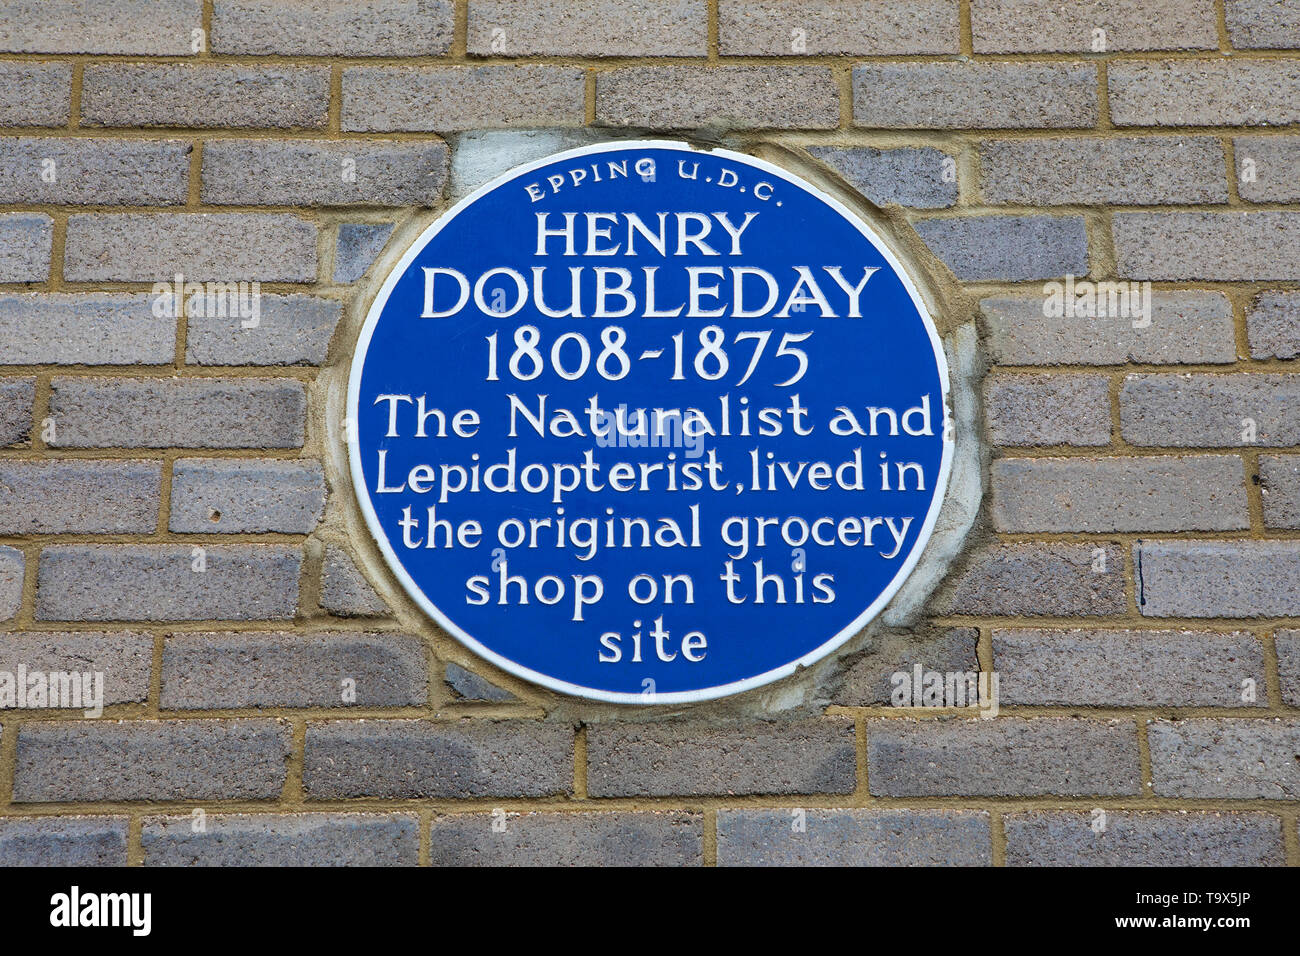 Essex, UK - May 18th 2019: A blue plaque in the town of Epping, commemorating famous Naturalist and Lepidopterist Henry Doubleday - who once lived on  Stock Photo